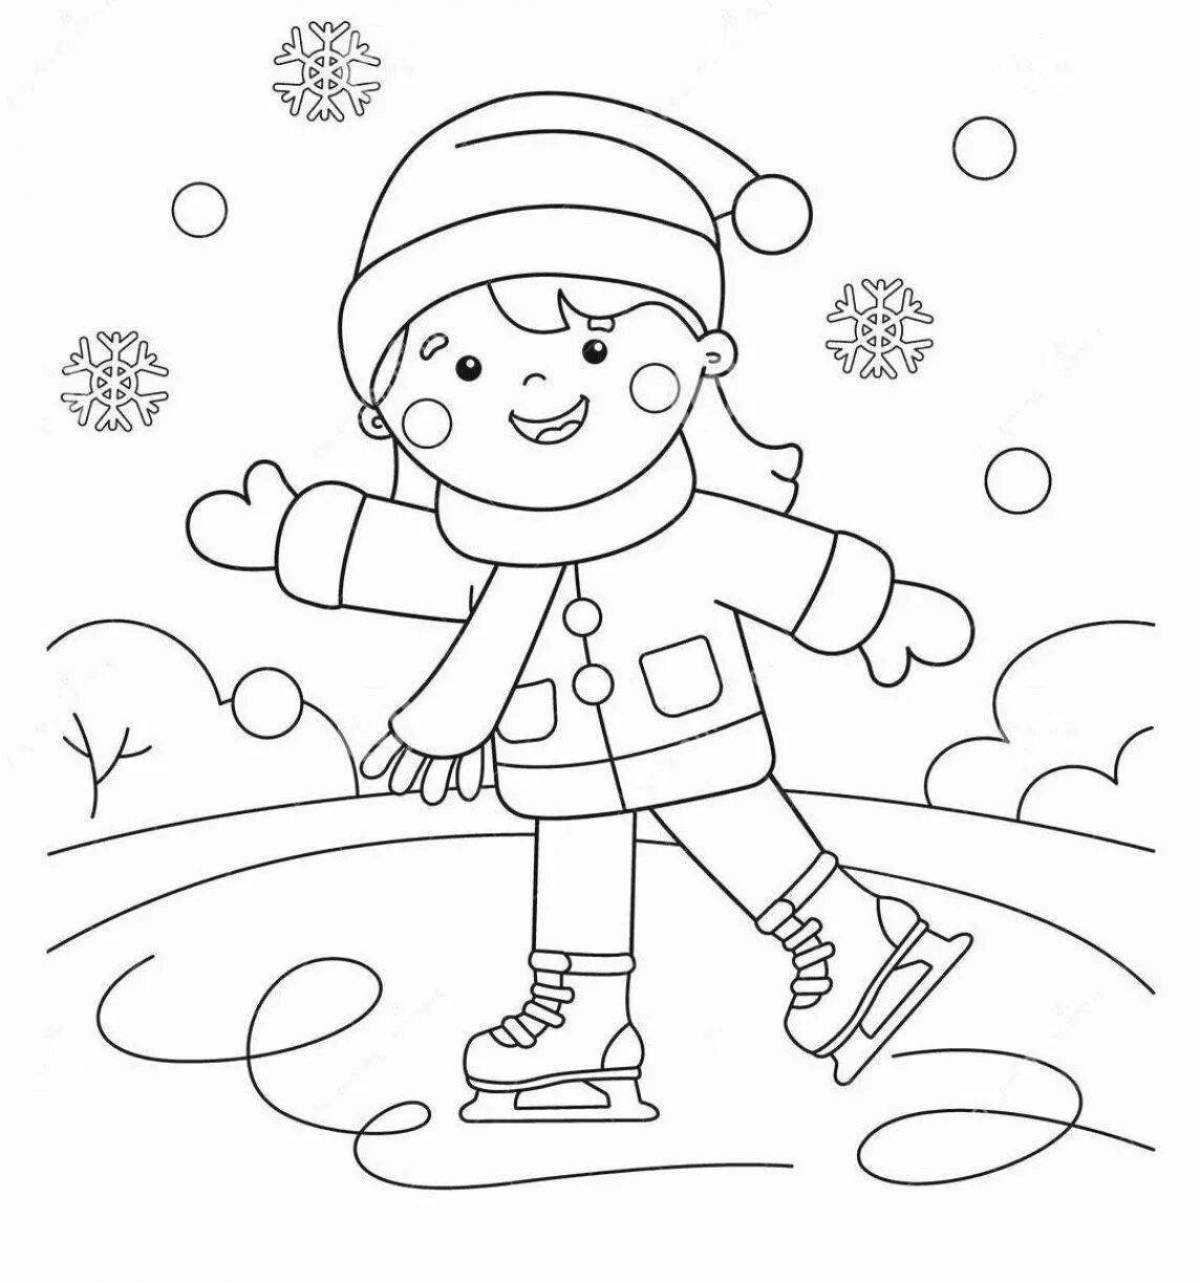 Children's coloring with figures on skates